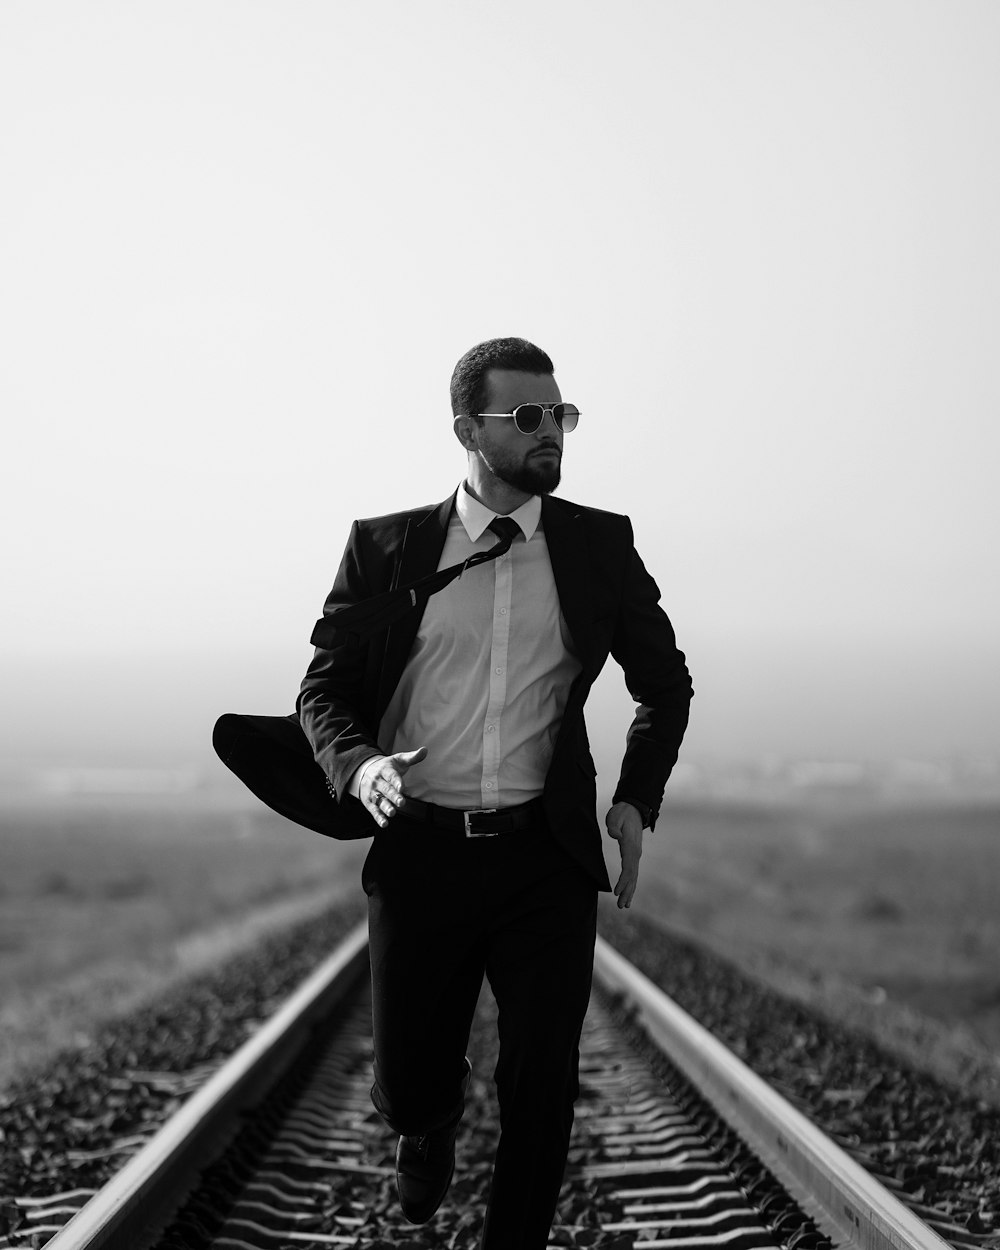 a man in a suit and tie standing on a train track